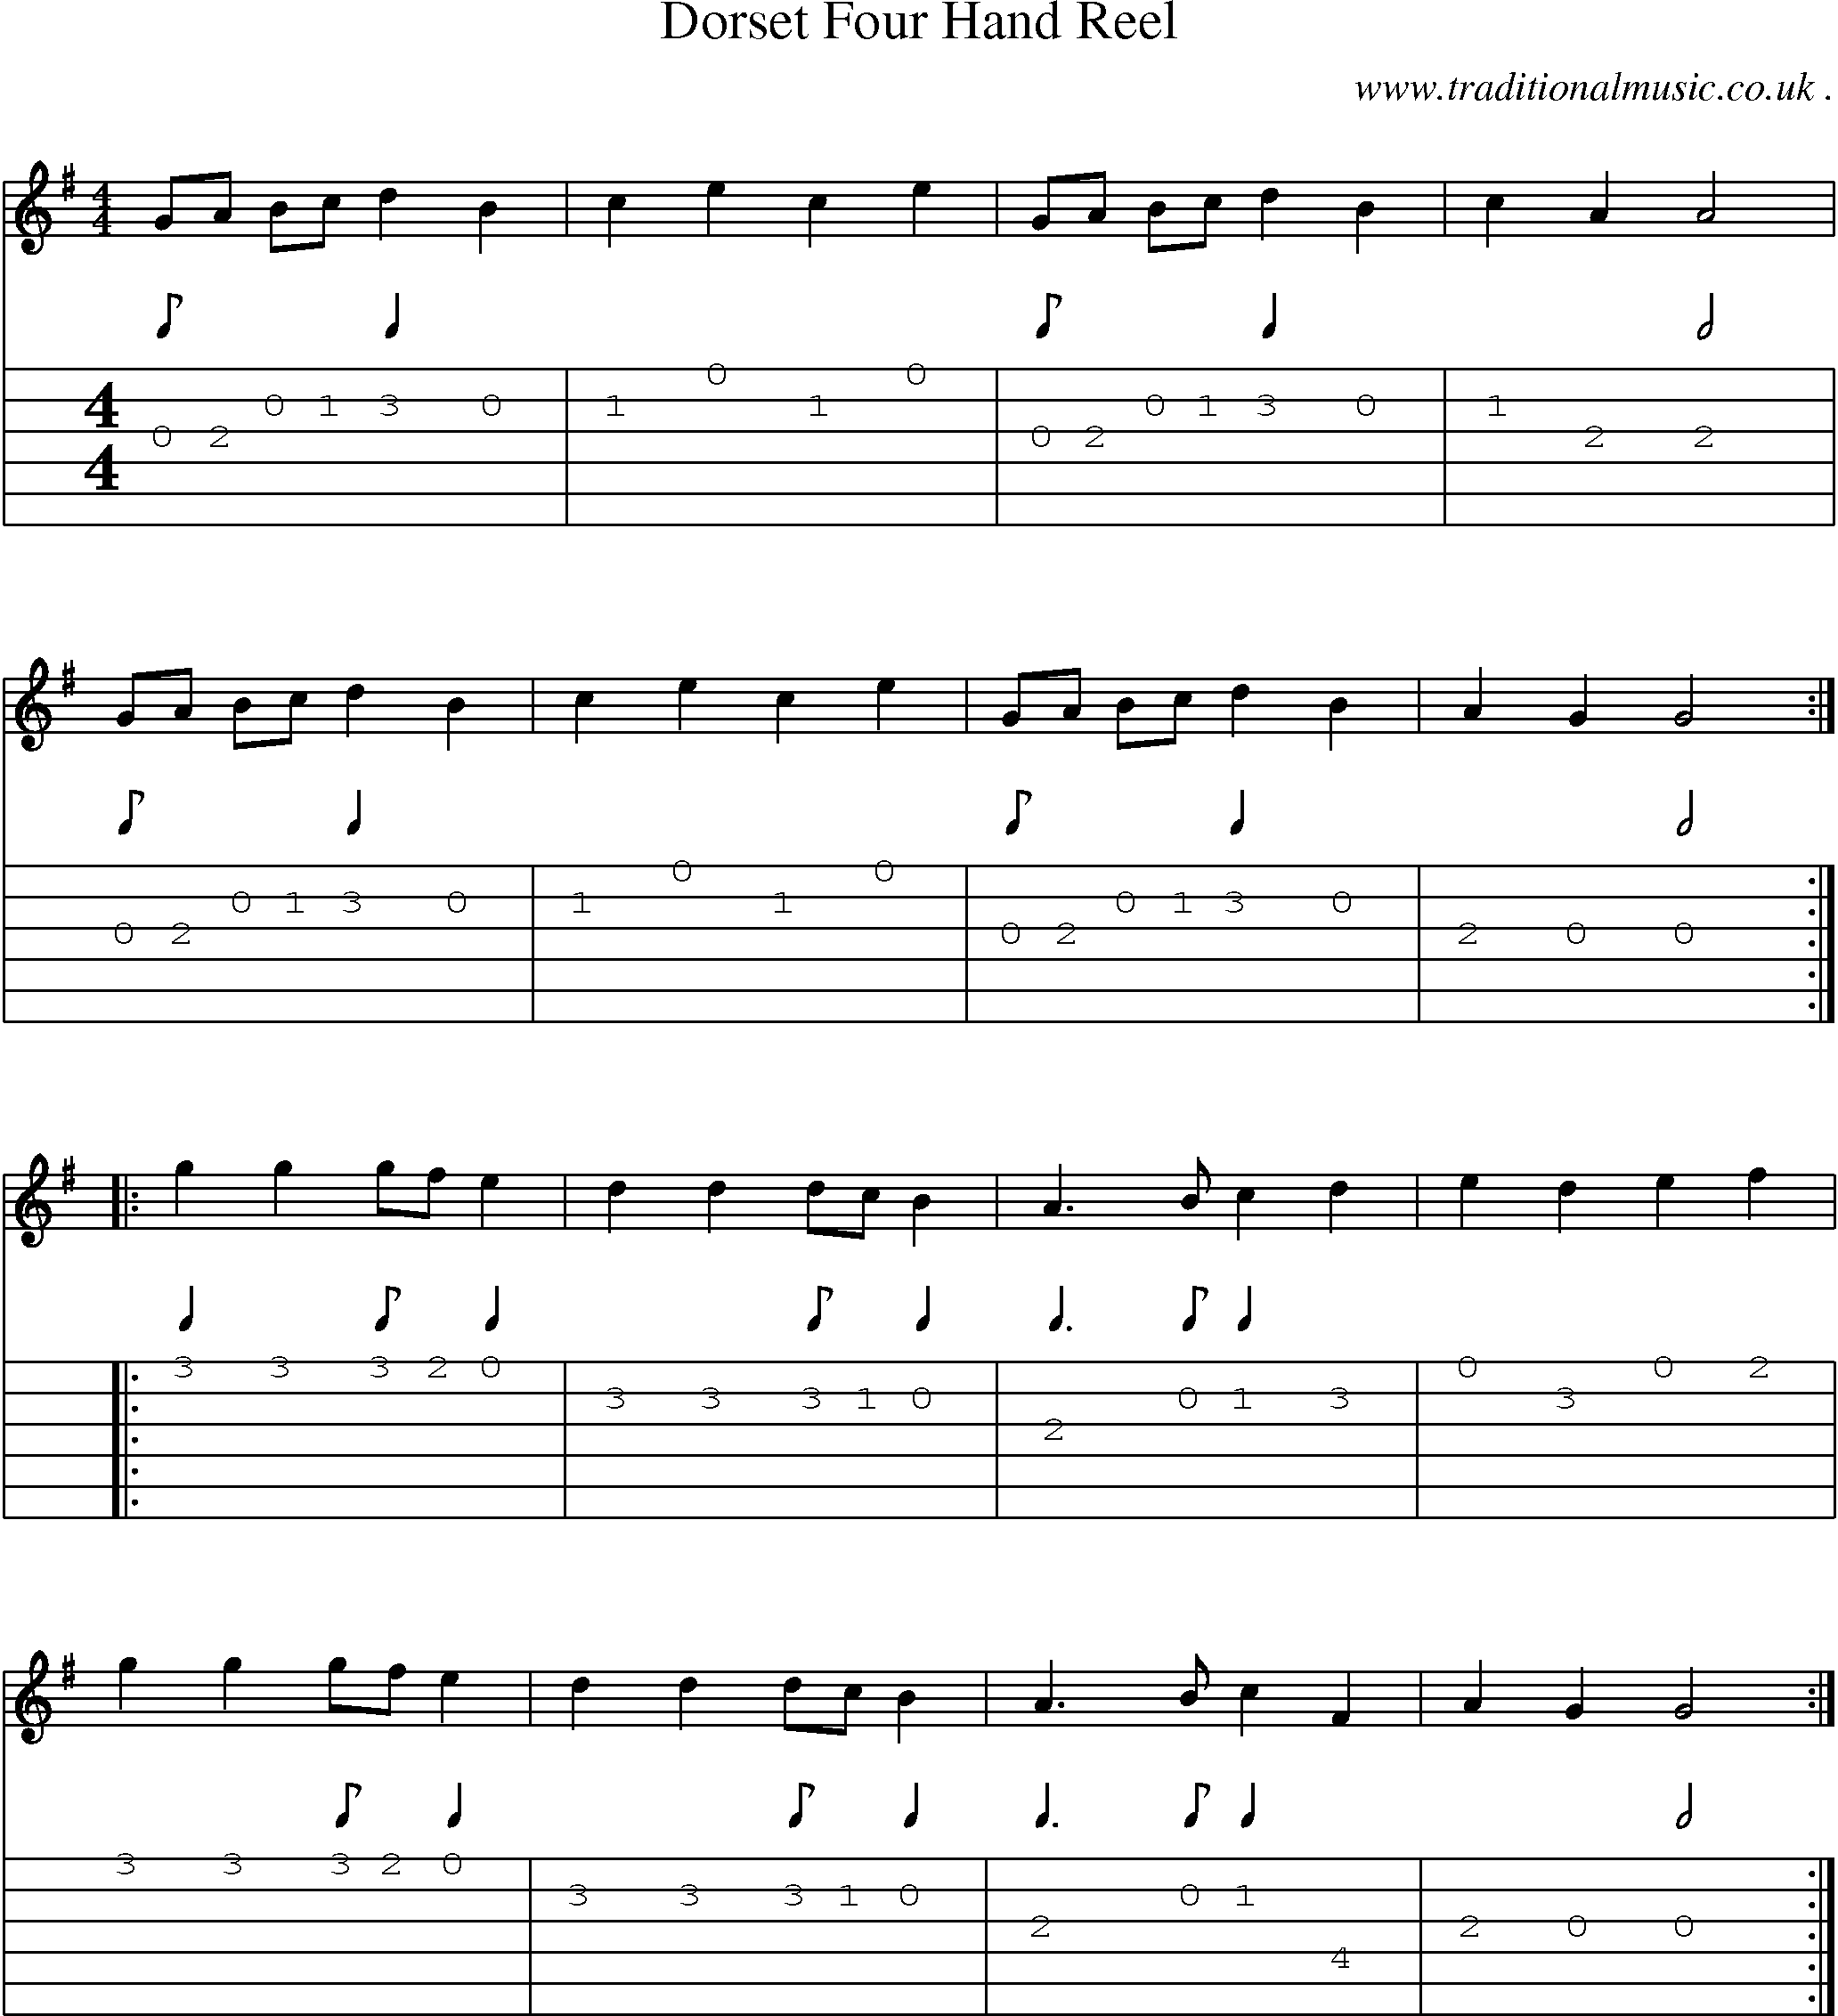 Sheet-Music and Guitar Tabs for Dorset Four Hand Reel